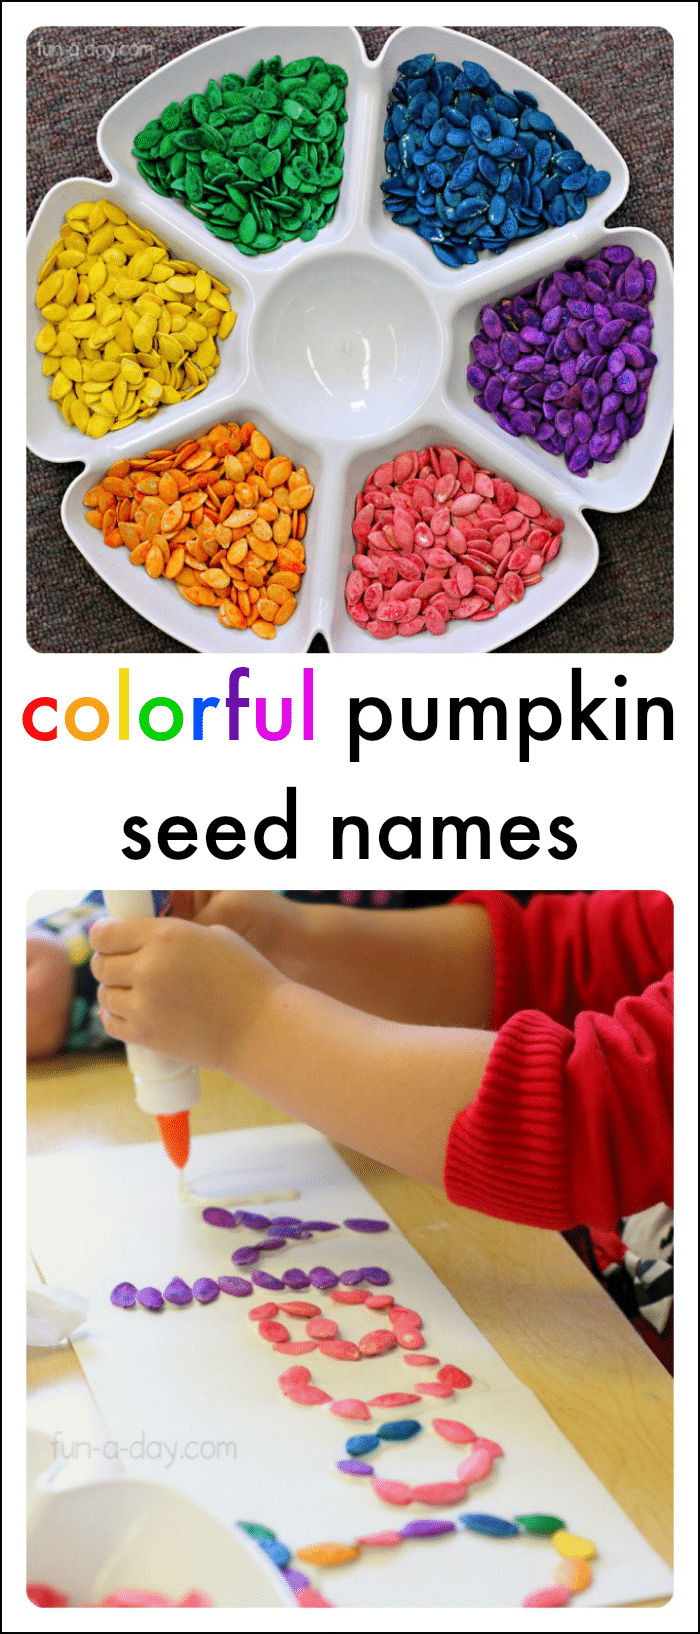 Rainbow pumpkin seeds name activities for kids to try today